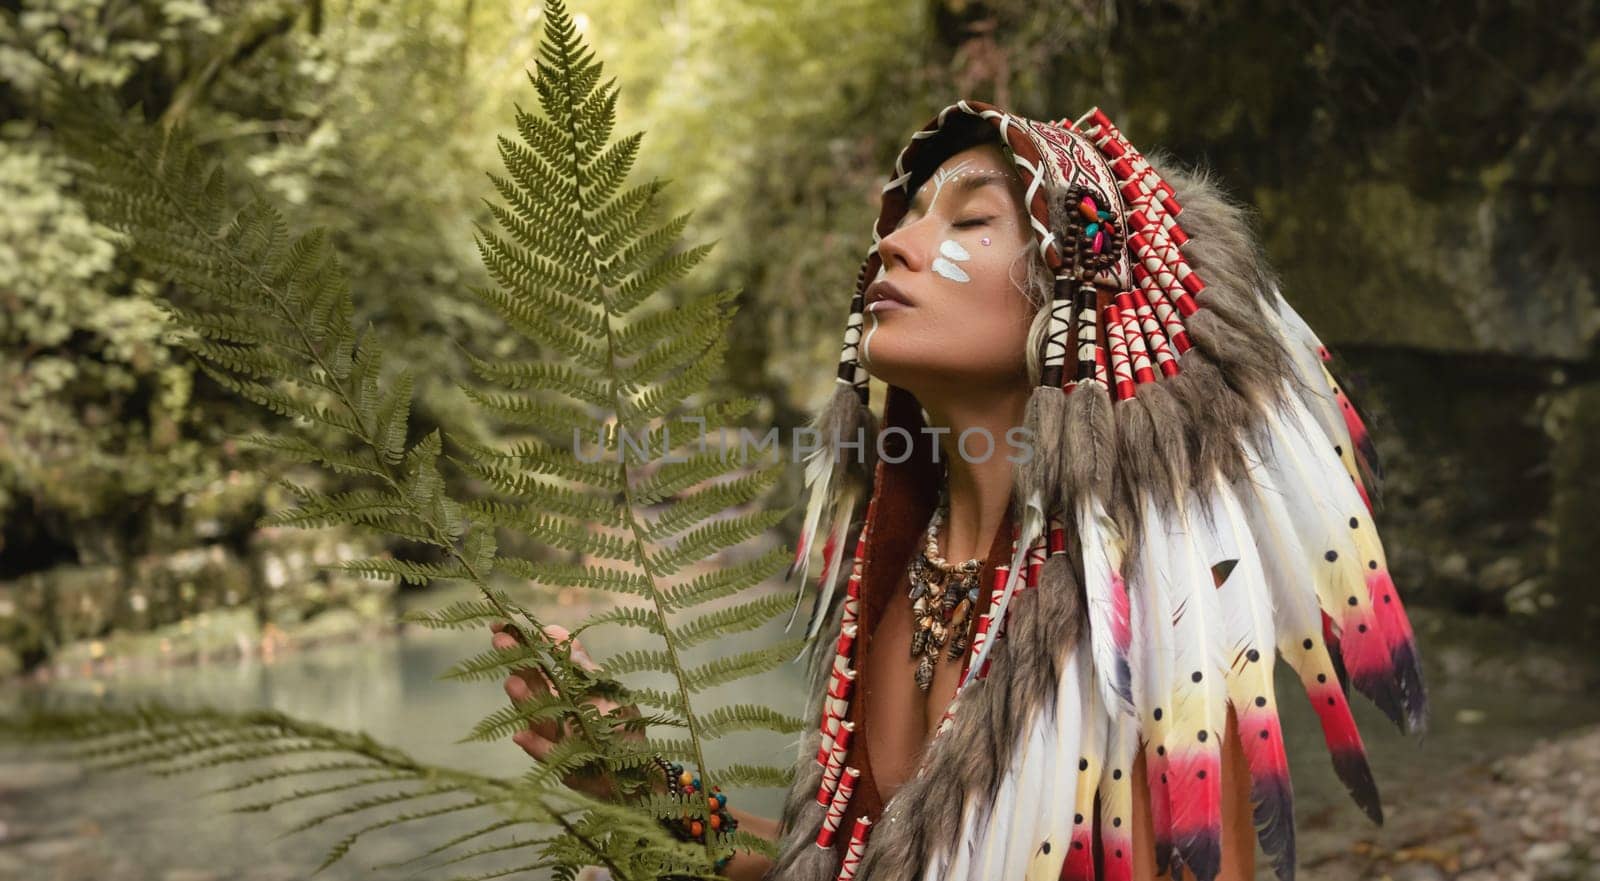 the portrait of a young girl in Native American Headdresses against the background of nature